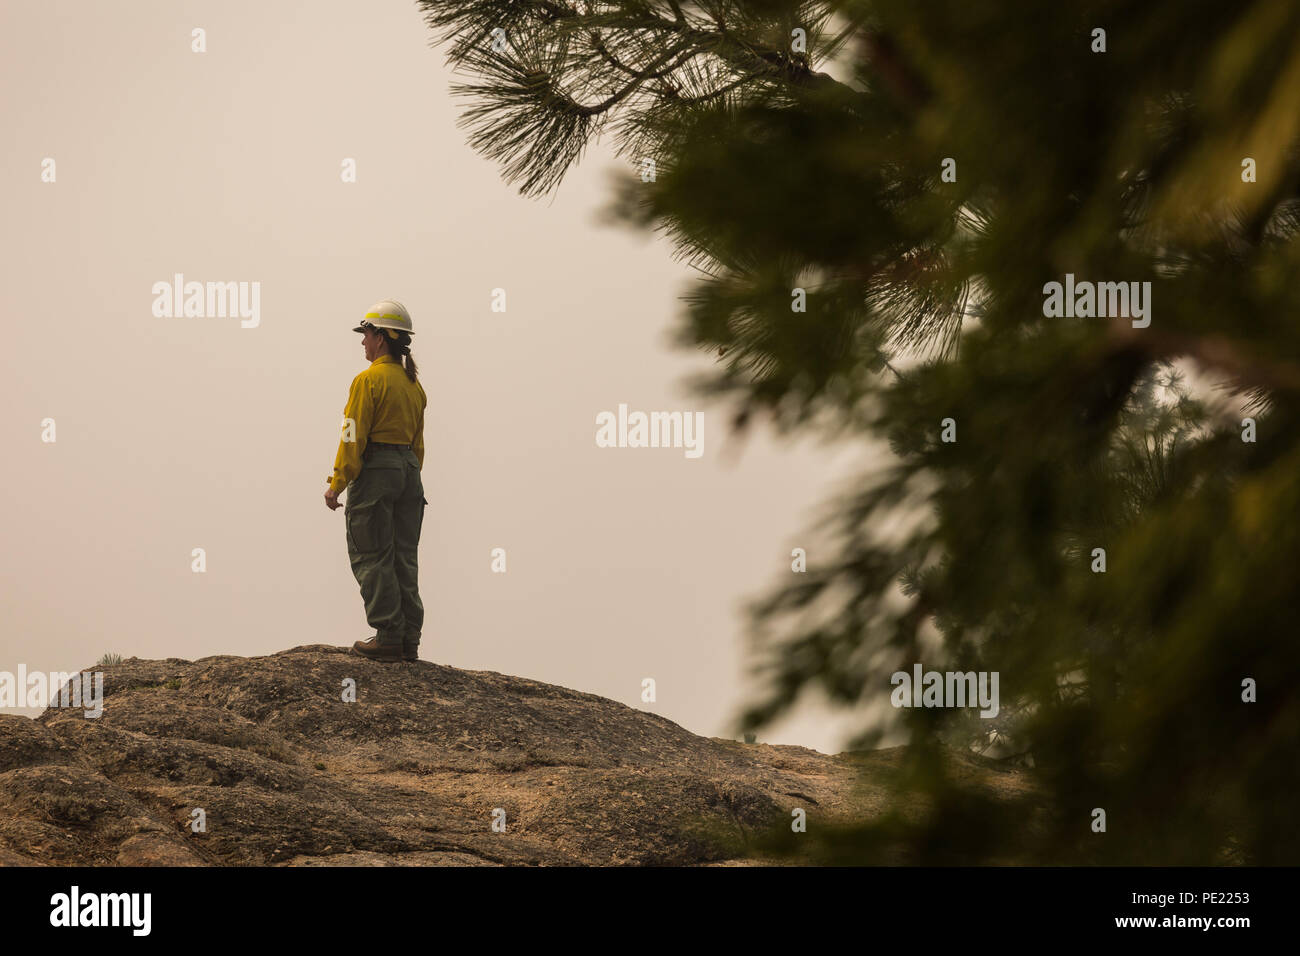 Dardanelle, California, USA. 10th Aug, 2018. Friday, August 10, 2018.United States Forest Service (USFS) employee, DIANE RENDANO-CROSS stands at a vista viewpoint along Highway 108 just to the east of Kennedy Meadows, near Sonora Pass, California. Normally seen from this vista are sweeping views of the Sierra Nevada mountains.Originally from New Jersey, Rendano-Cross currently lives near Ojai and is employed by the Los Padres National Forest. She was formerly married to a firefighter and the couple was a dual-career family while raising two daughters. A now-divorced empty-nester, Rendano- Stock Photo